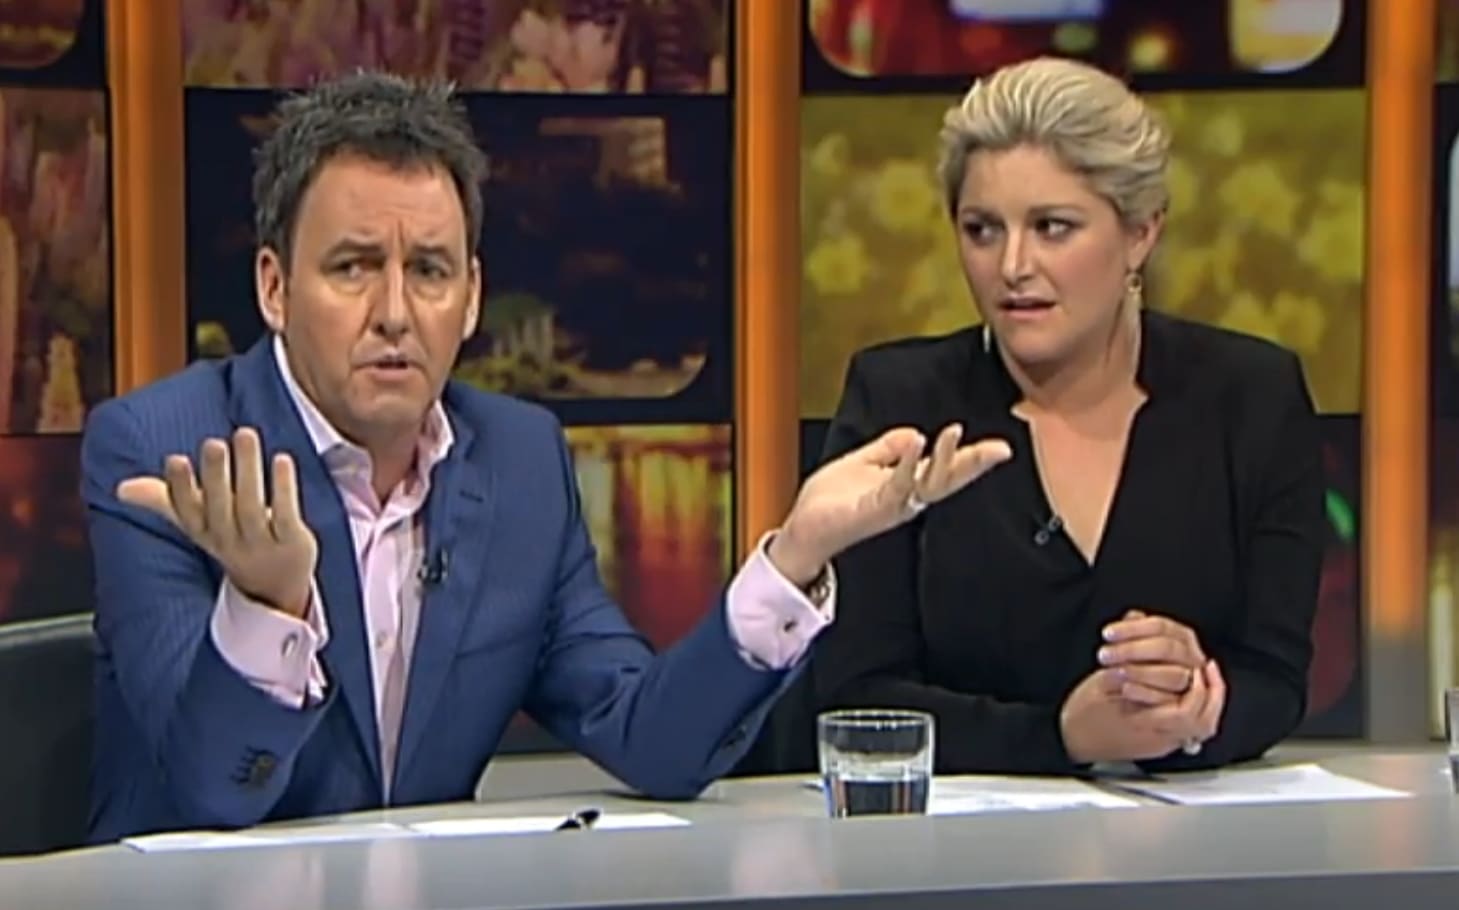 Mike Hosking airs a controversial opinion on New Plymouth mayor Andrew Judd on TVNZ's Seven Sharp last month.